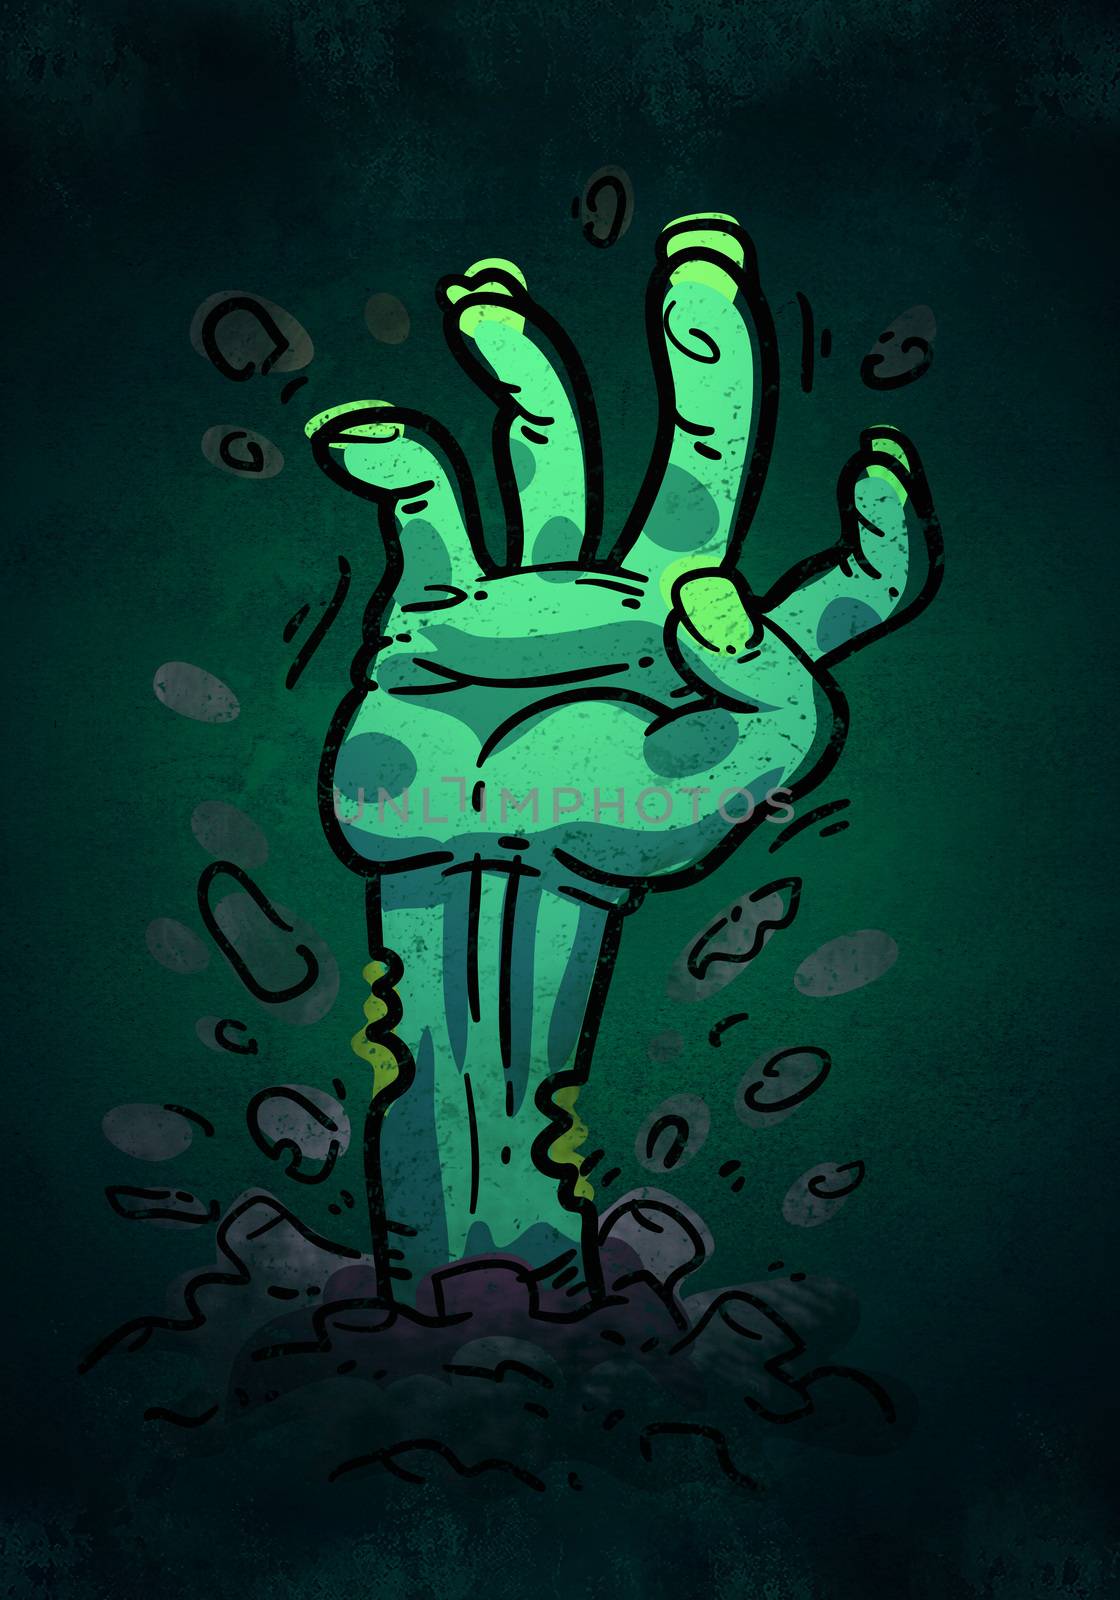 Cartoon Zombie Hand. Halloween poster, background or card.